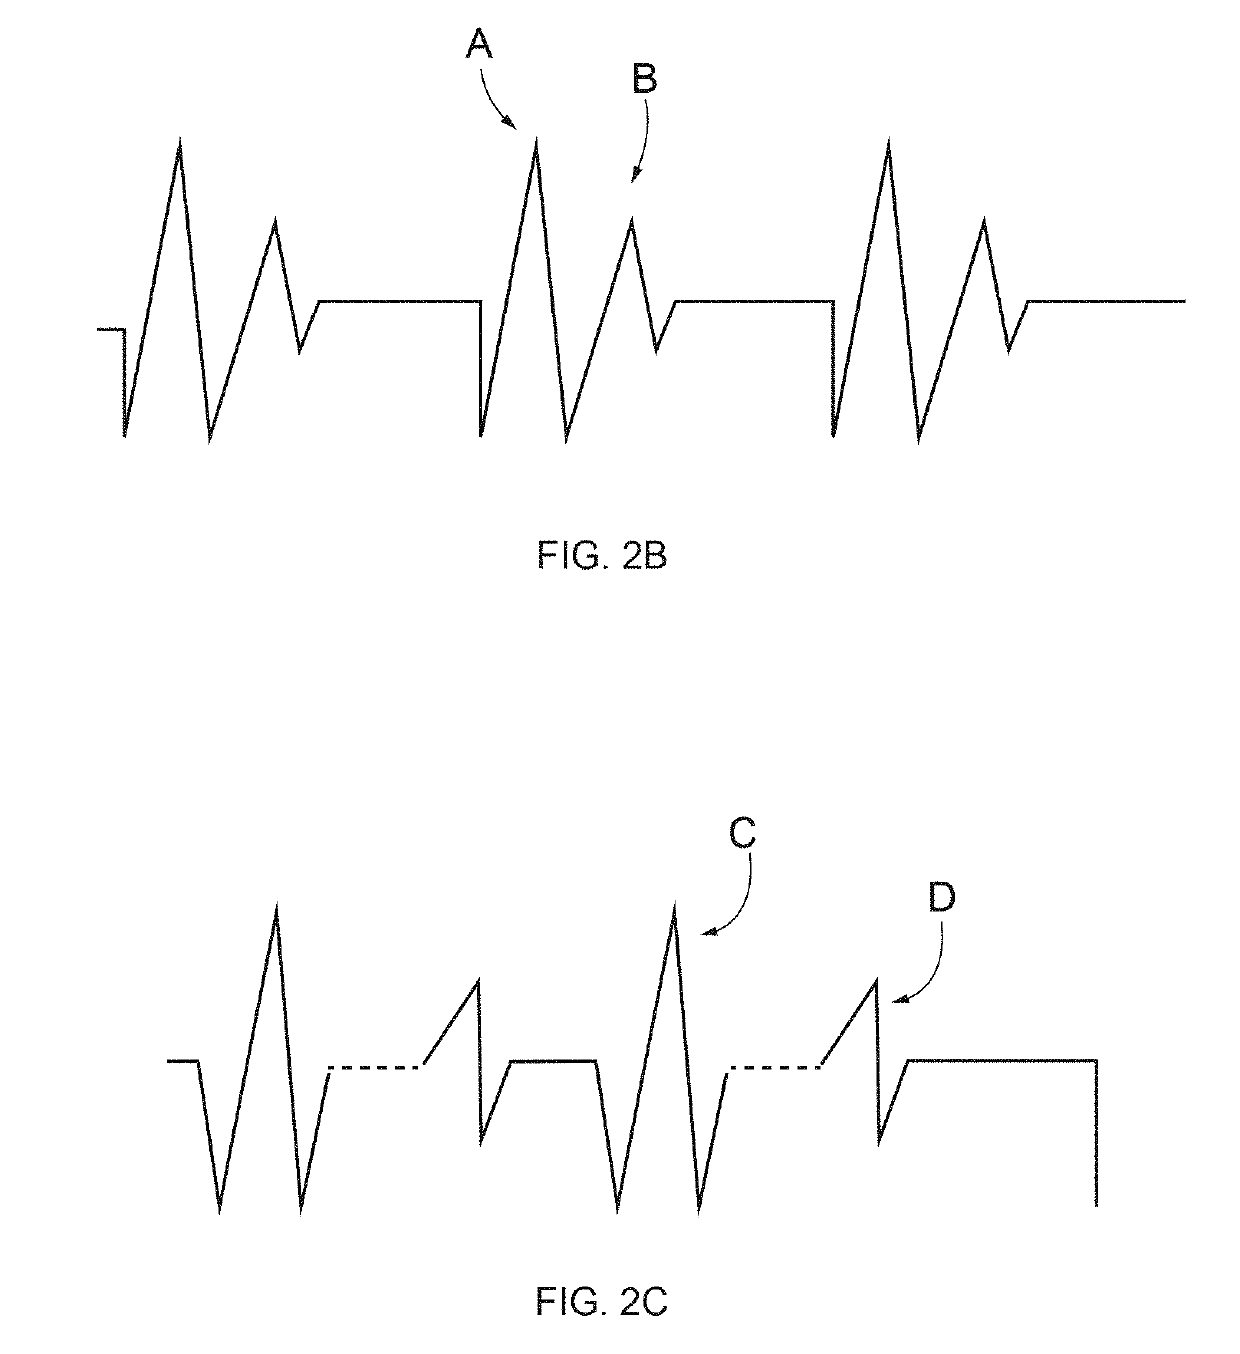 Devices AMD methods for brain stimulation